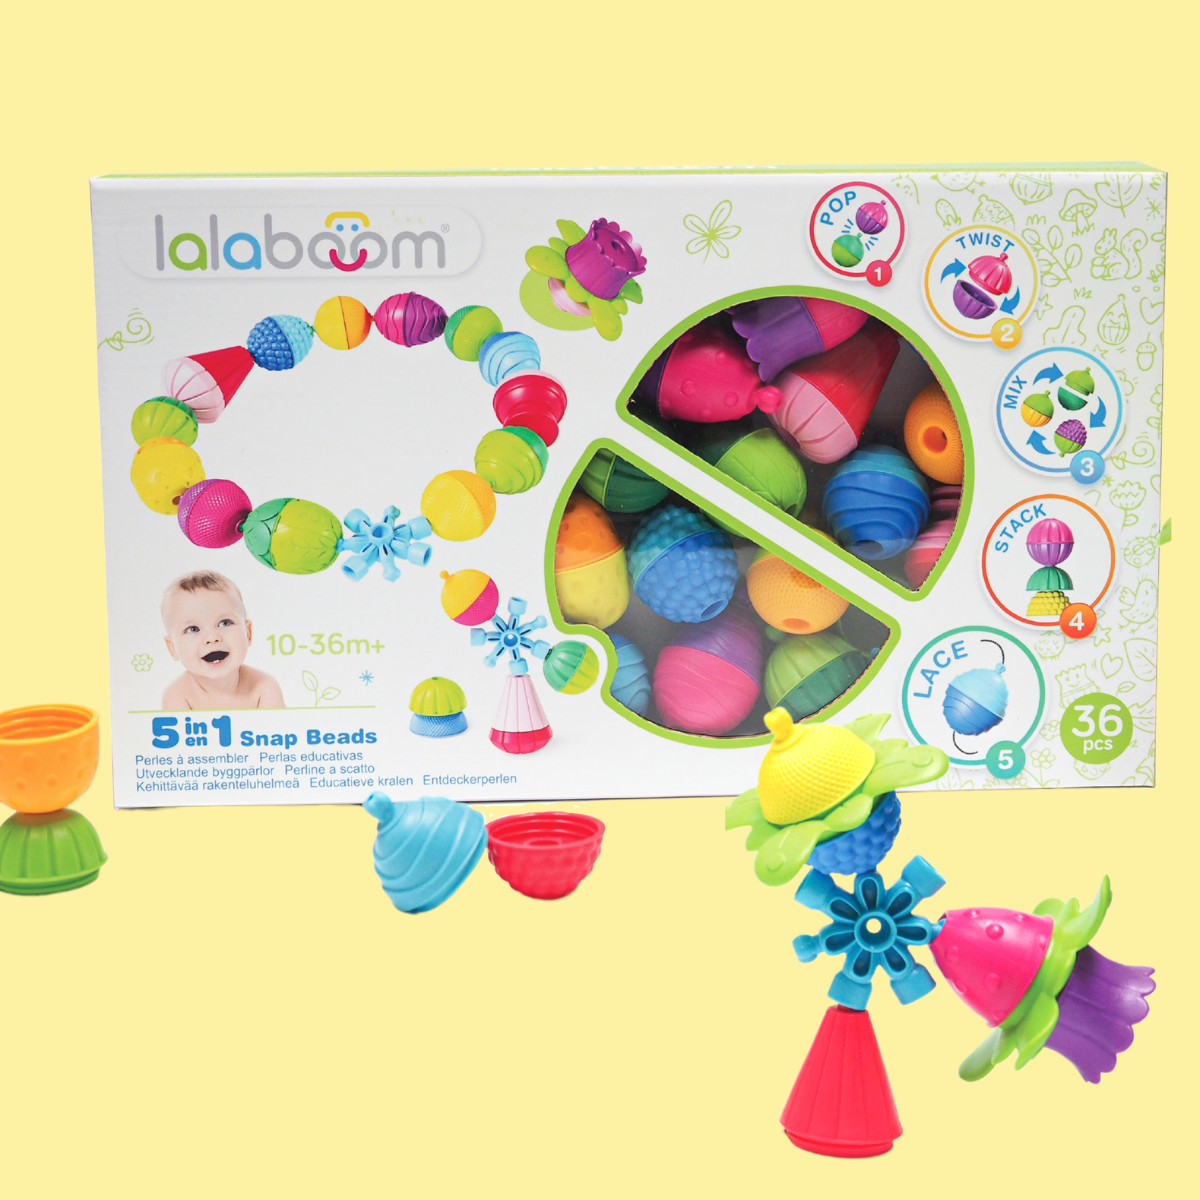 Lalaboom box of 36 pieces with yellow background with some brightly-coloured beads out of the box.